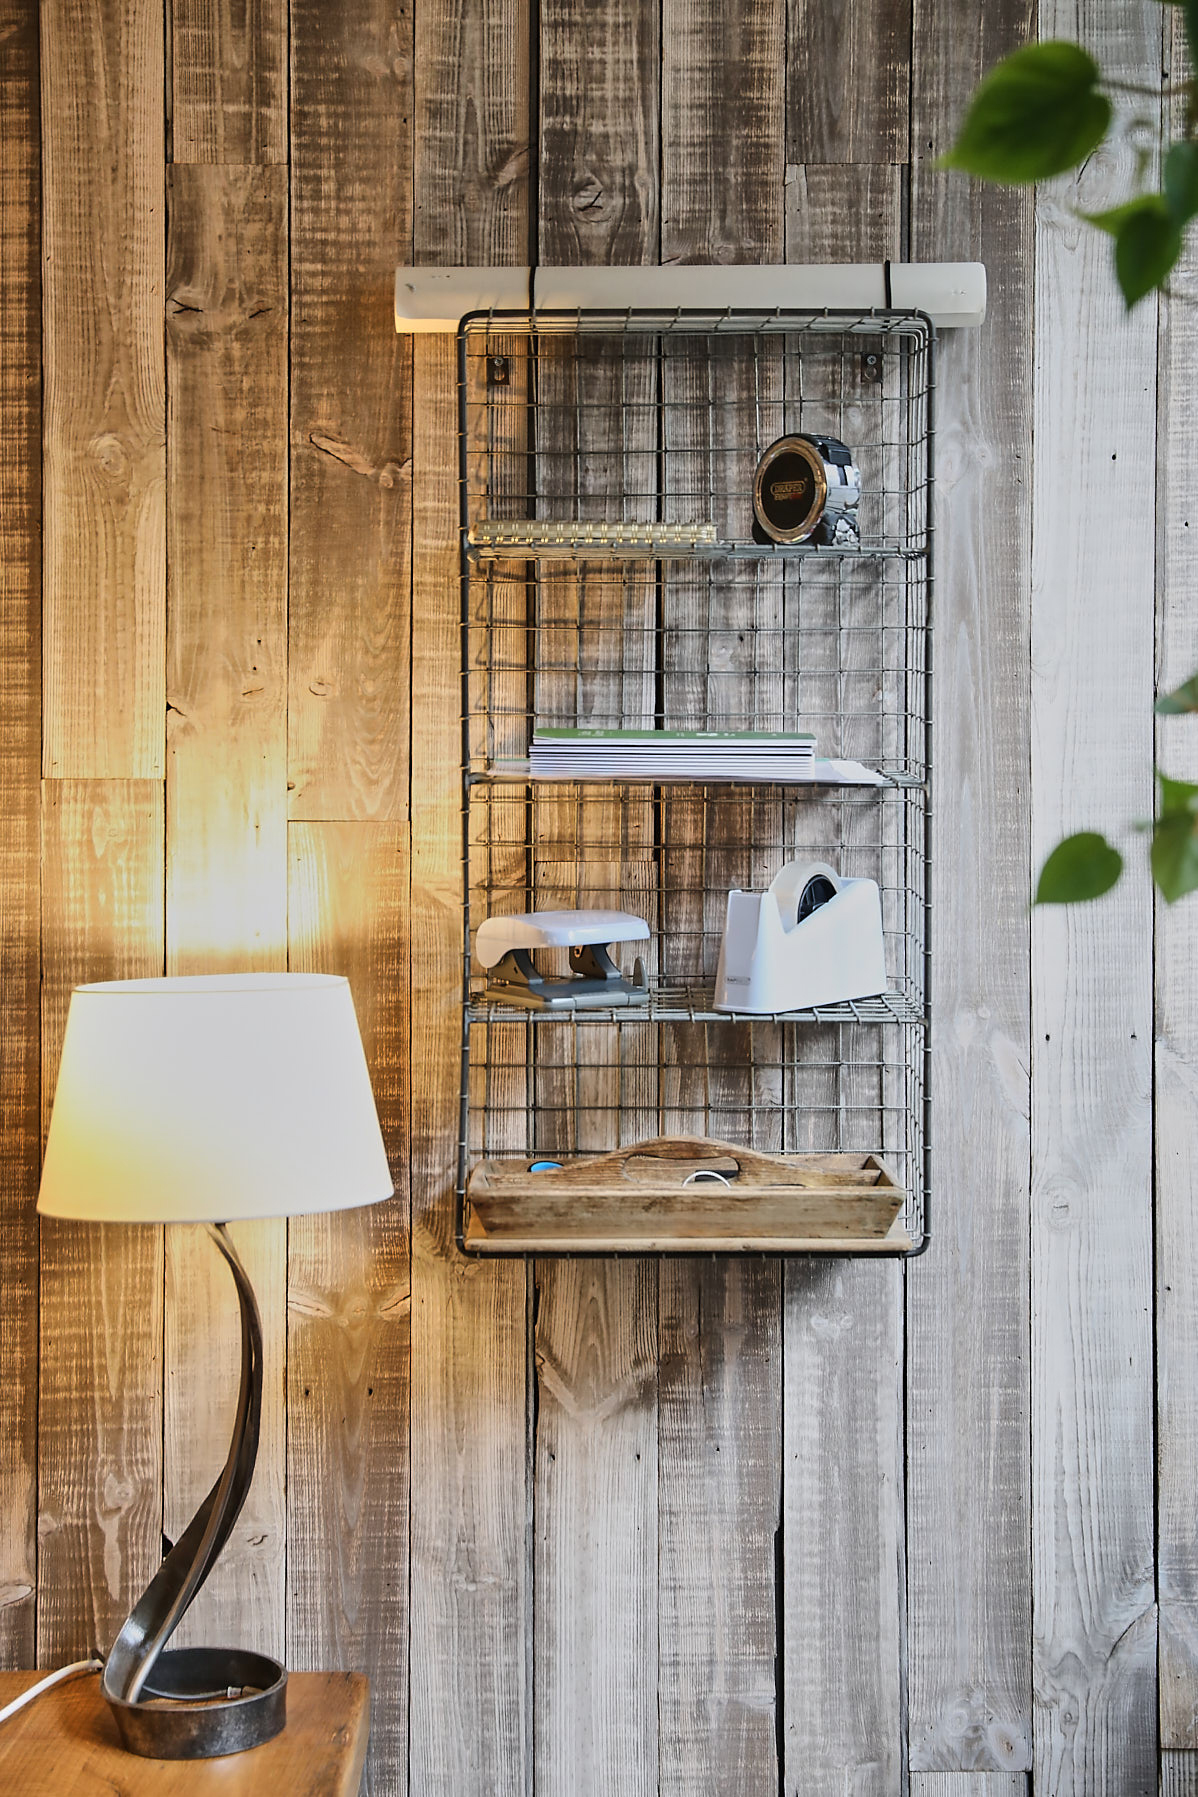 Reclaimed wall cladding with wire shelf